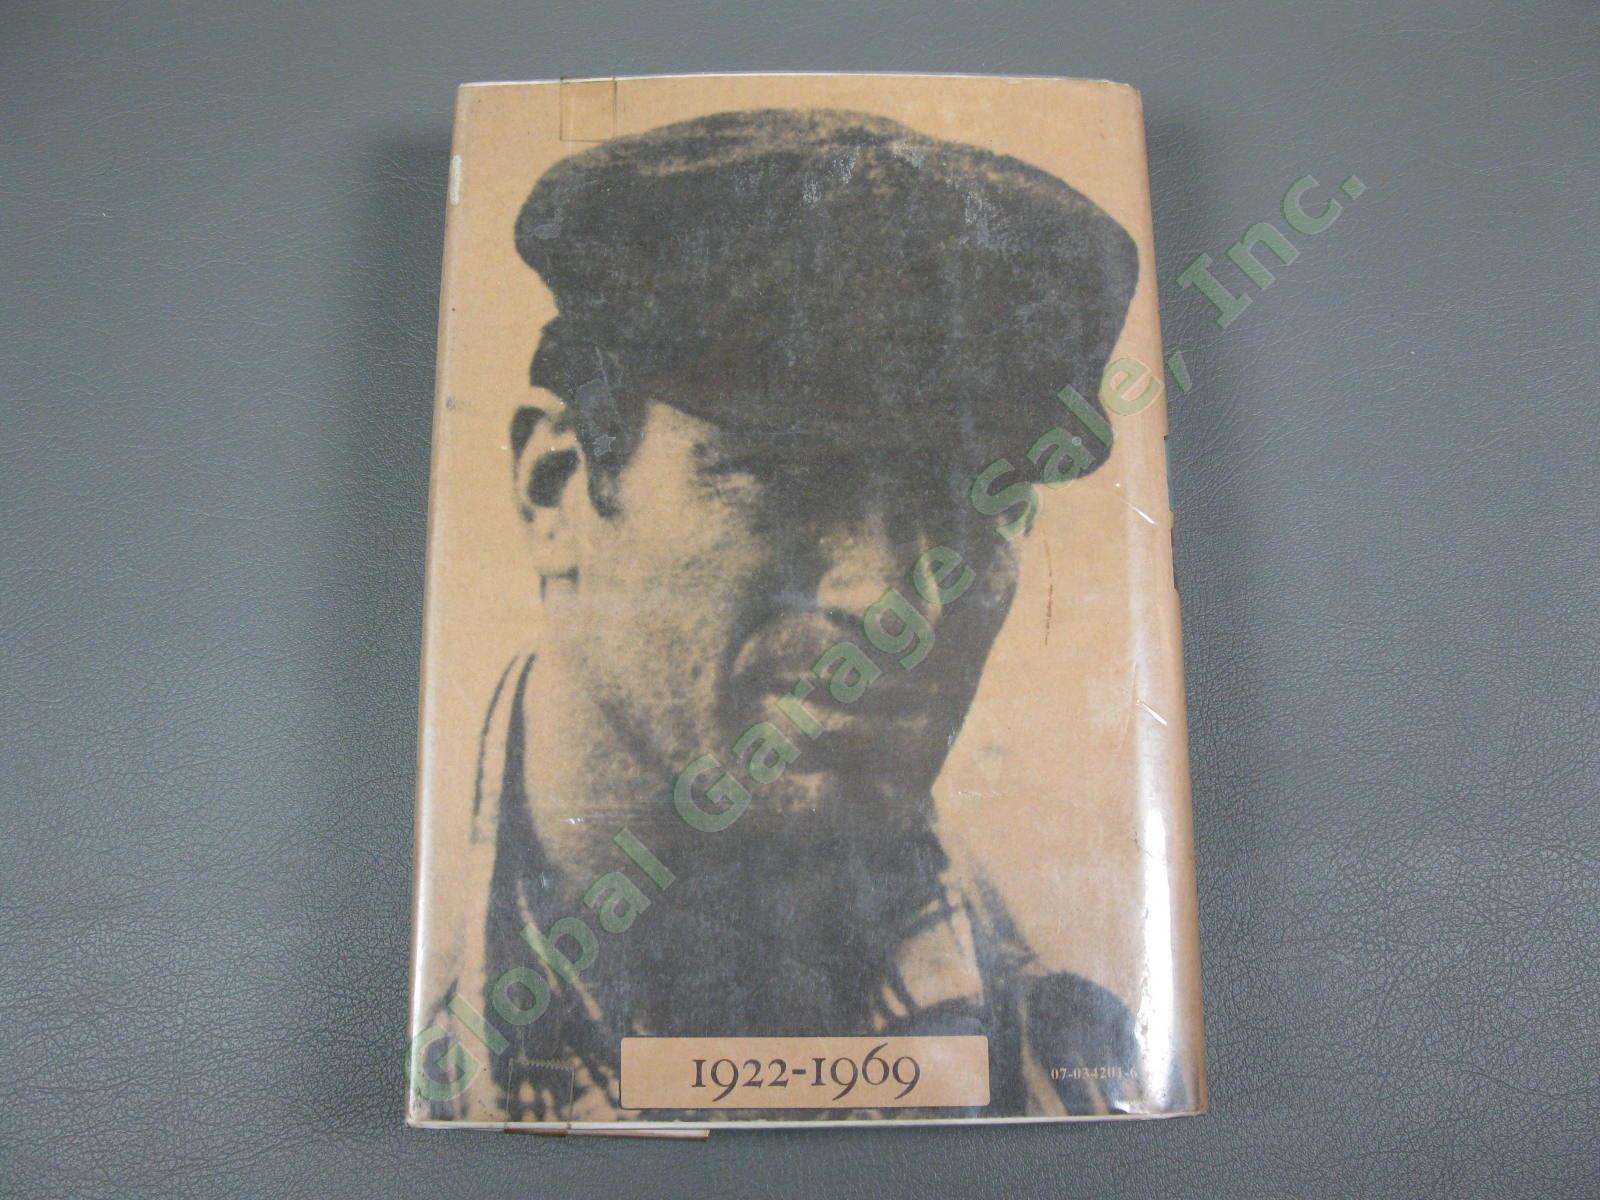 1st Edition Printing 1972 Jack Kerouac Visions of Cody Book Ginsberg McGraw-Hill 5